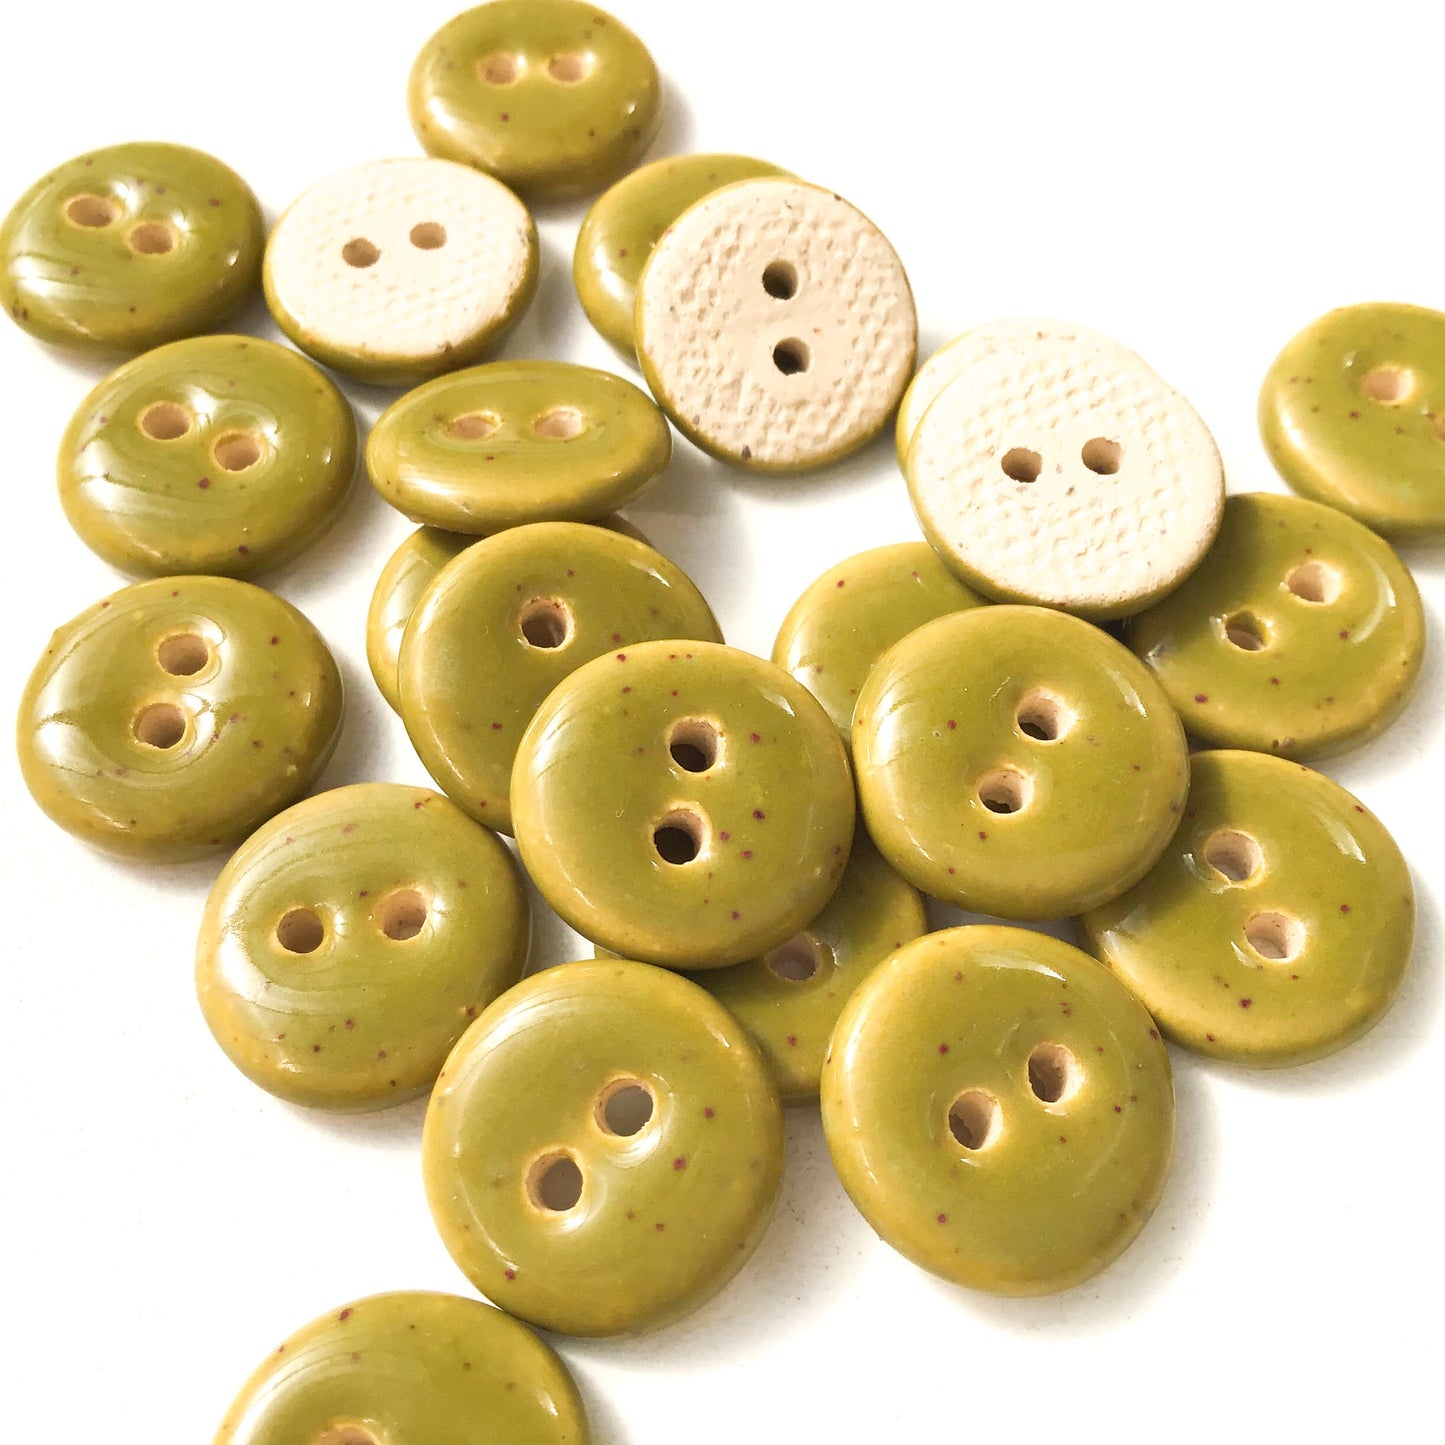 Speckled Olive Green Ceramic Buttons - Mossy Green Clay Buttons - 9/16"